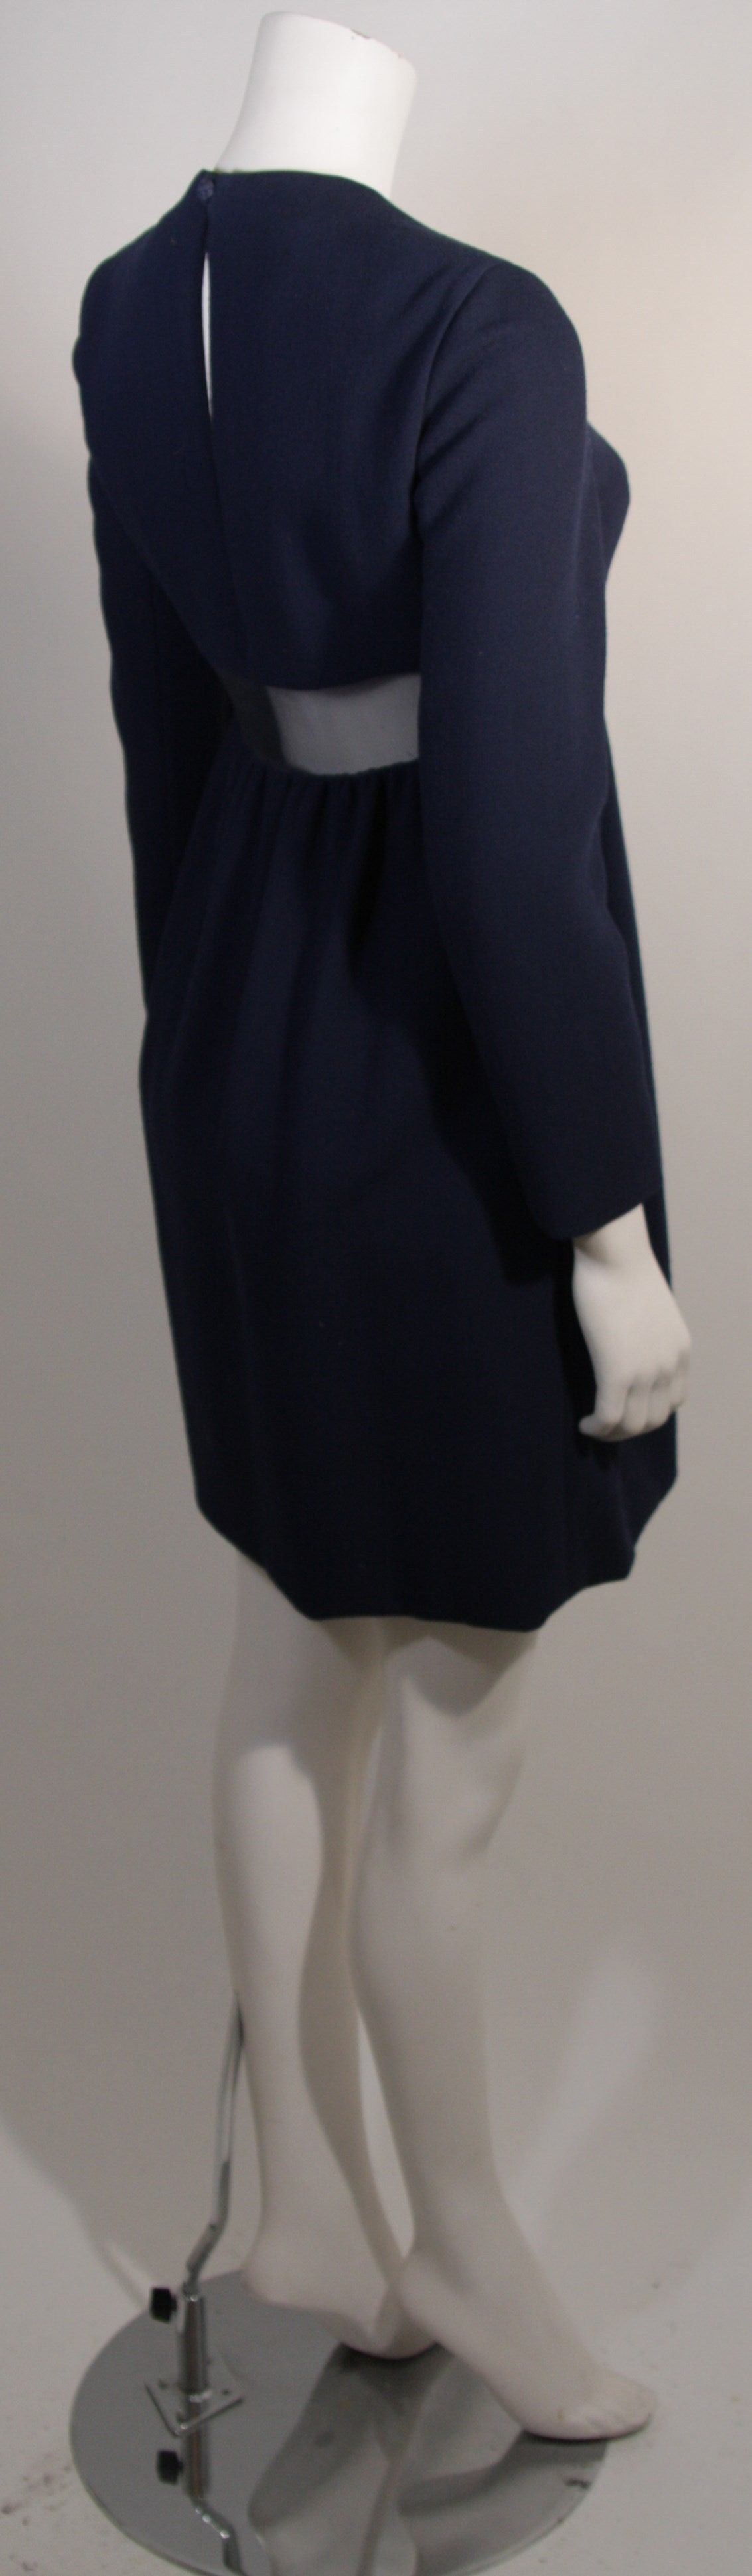 Galanos Navy Wool Mini Dress with Peek-a-boo Mesh Panel size 4 In Excellent Condition For Sale In Los Angeles, CA